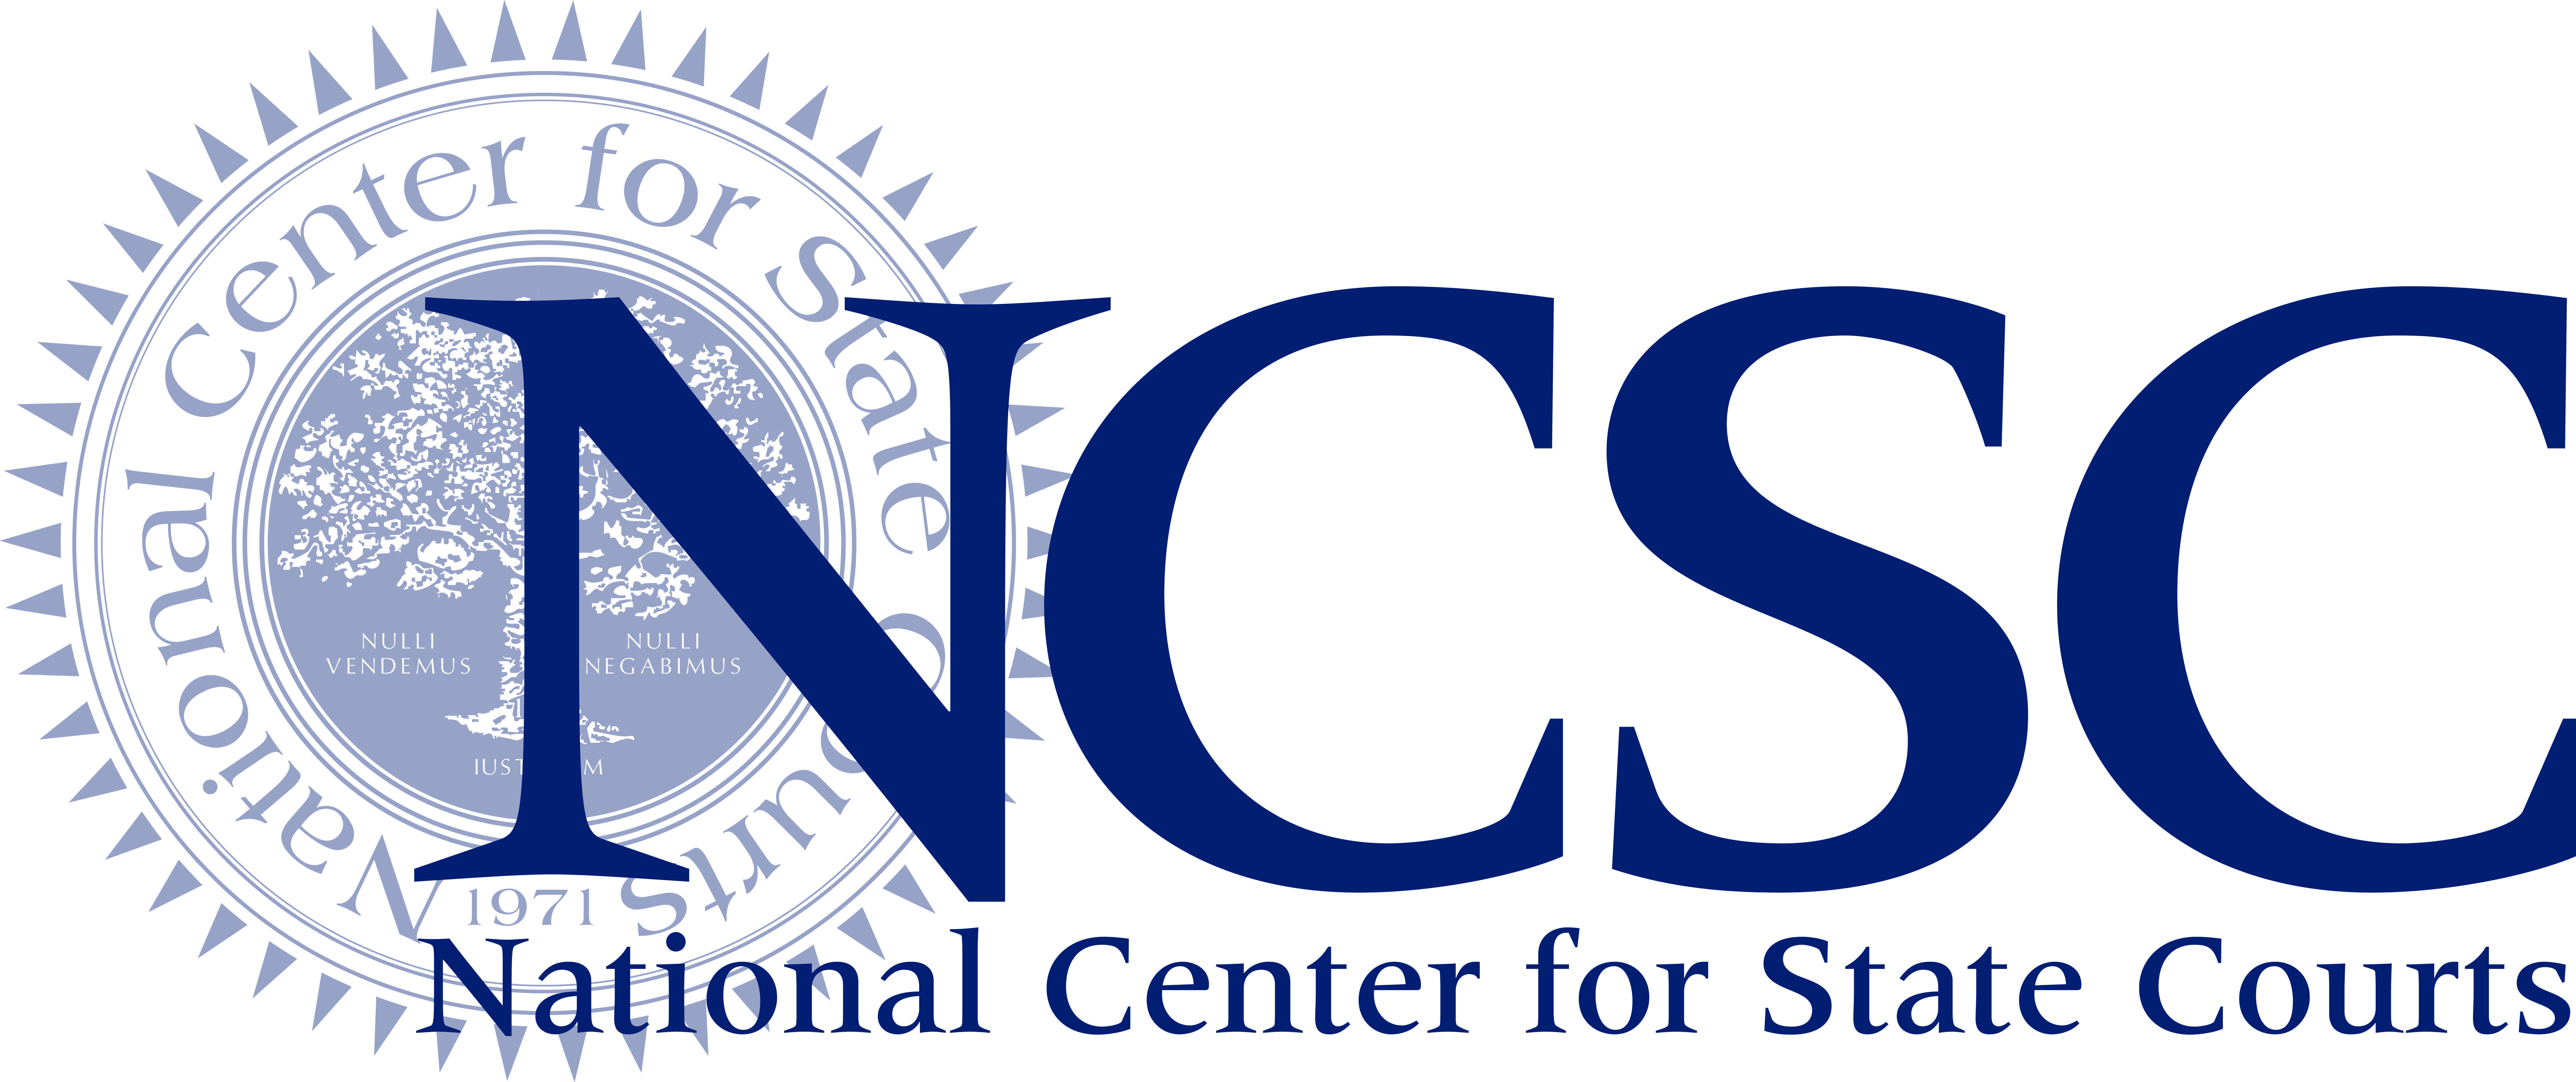 National Center for State Courts logo